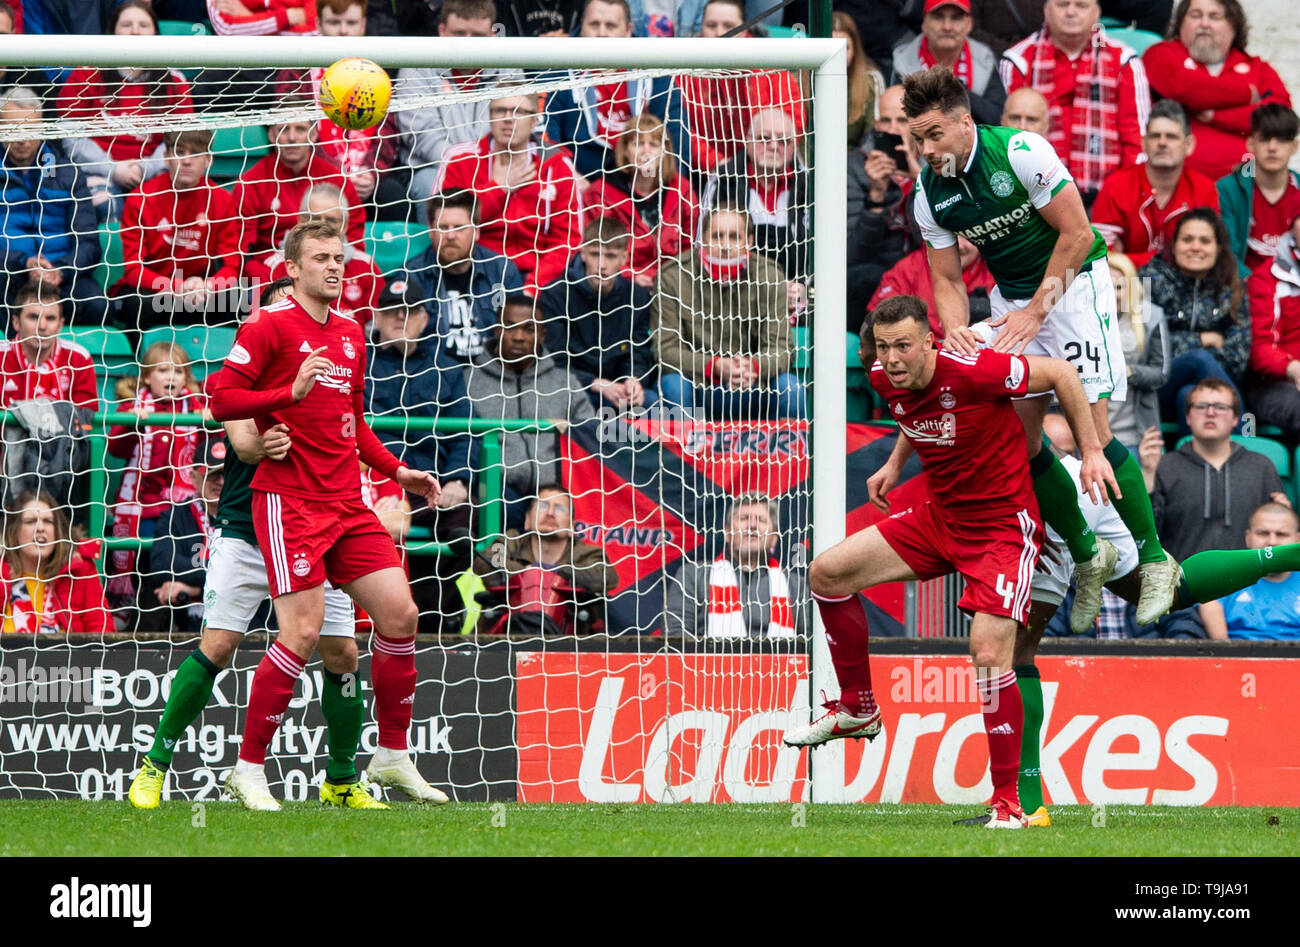 Edinburgh, Scotland, UK. 19th May, 2019.  Pic shows: Hibs' defender, Darren McGregor, clears the ball from Aberdeen defender, Andrew Considine, as the Dons press for a third goal during the second half as Hibs play host to Aberdeen at Easter Road Stadium, Edinburgh Credit: Ian Jacobs/Alamy Live News Stock Photo